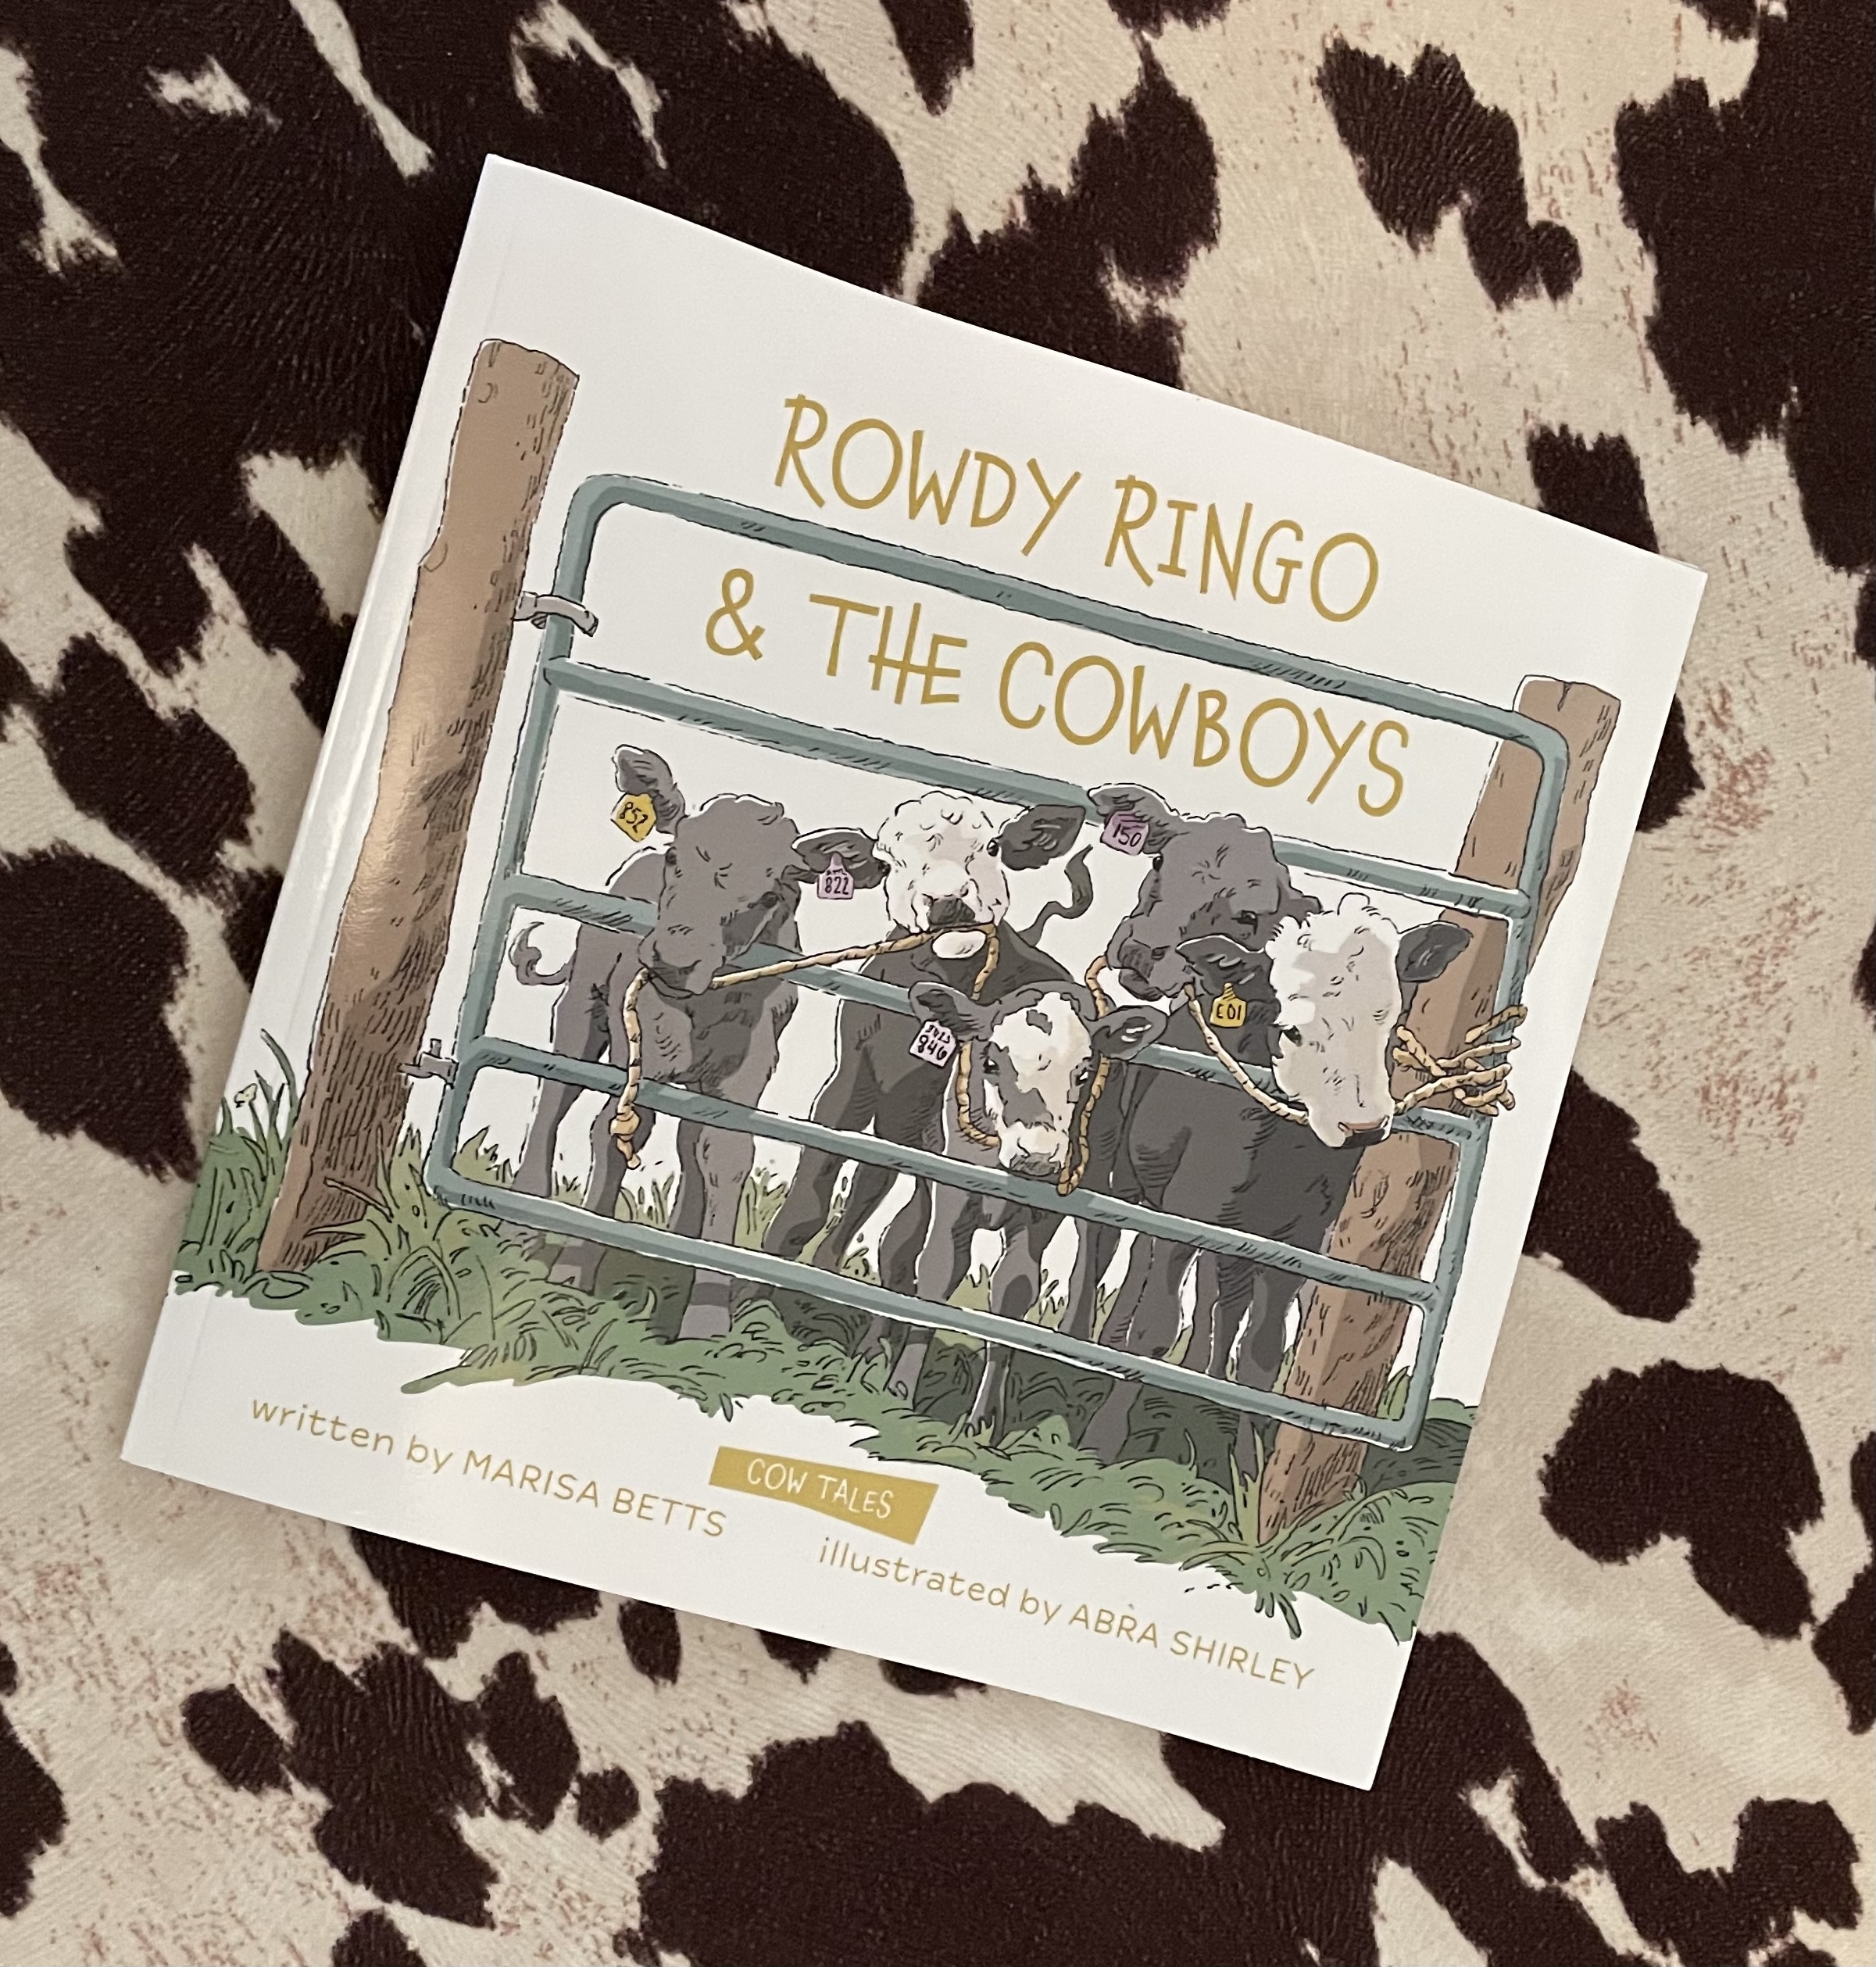 The cover of "Rowdy Ringo and the Cowboys" by Marisa Betts. (Photo by Jennifer Theurer.)